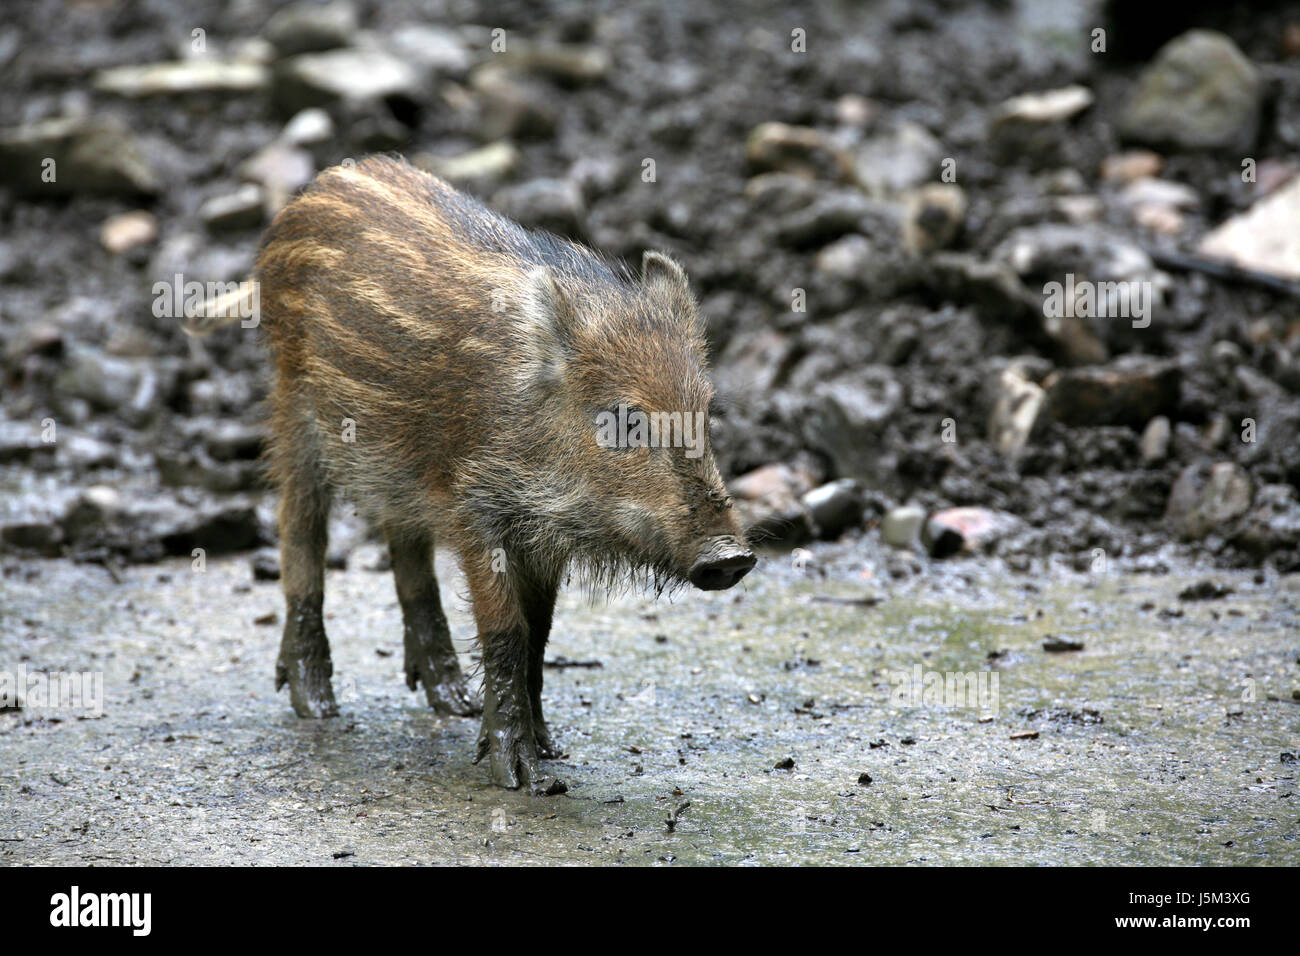 mammal wild wild boar pig wild animal wild boars dig young younger animal child Stock Photo